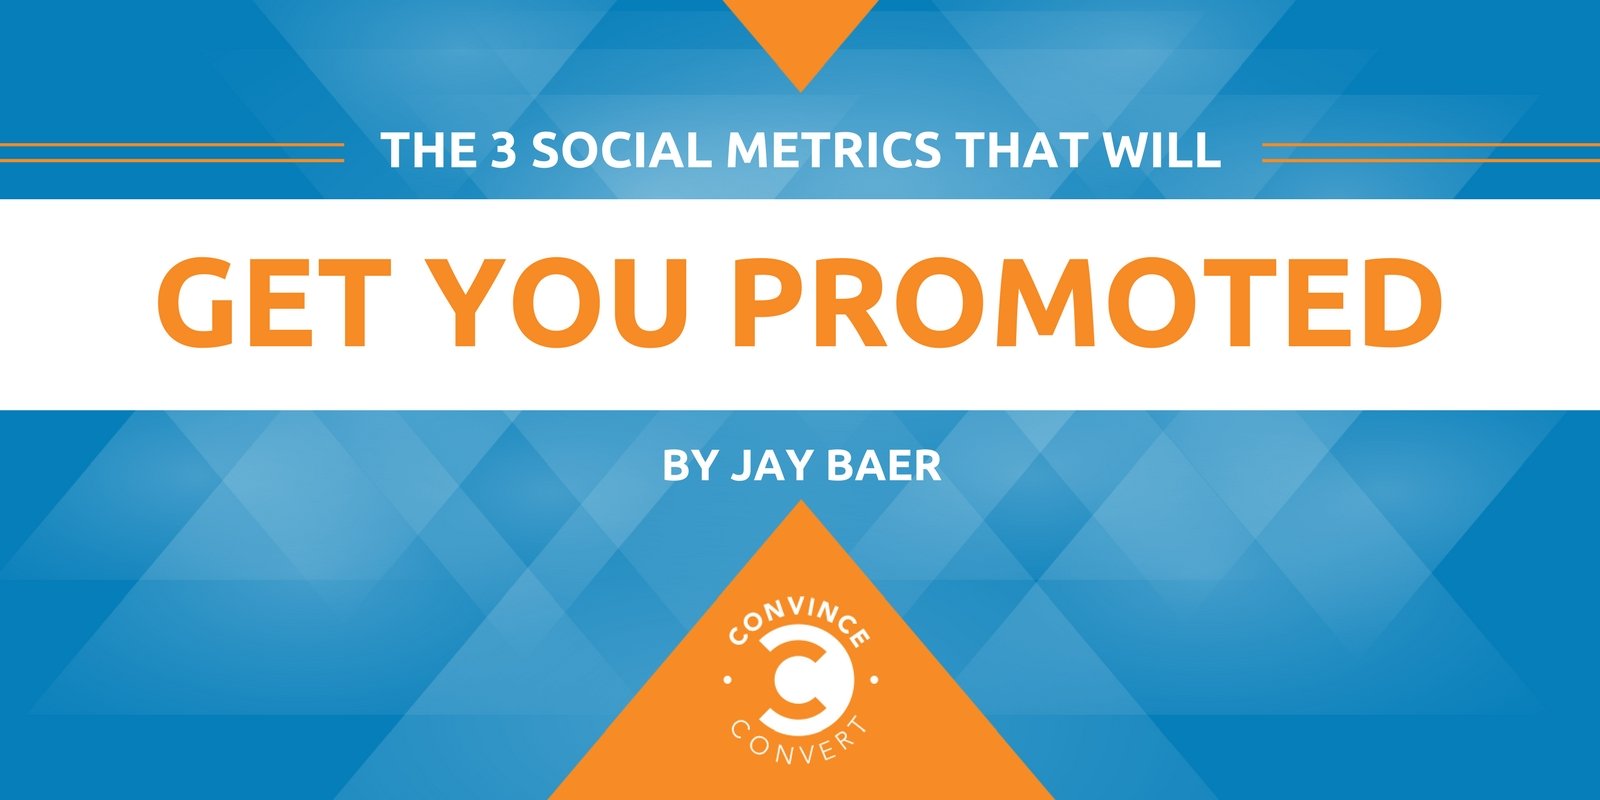 The 3 Social Metrics That Will Get You Promoted